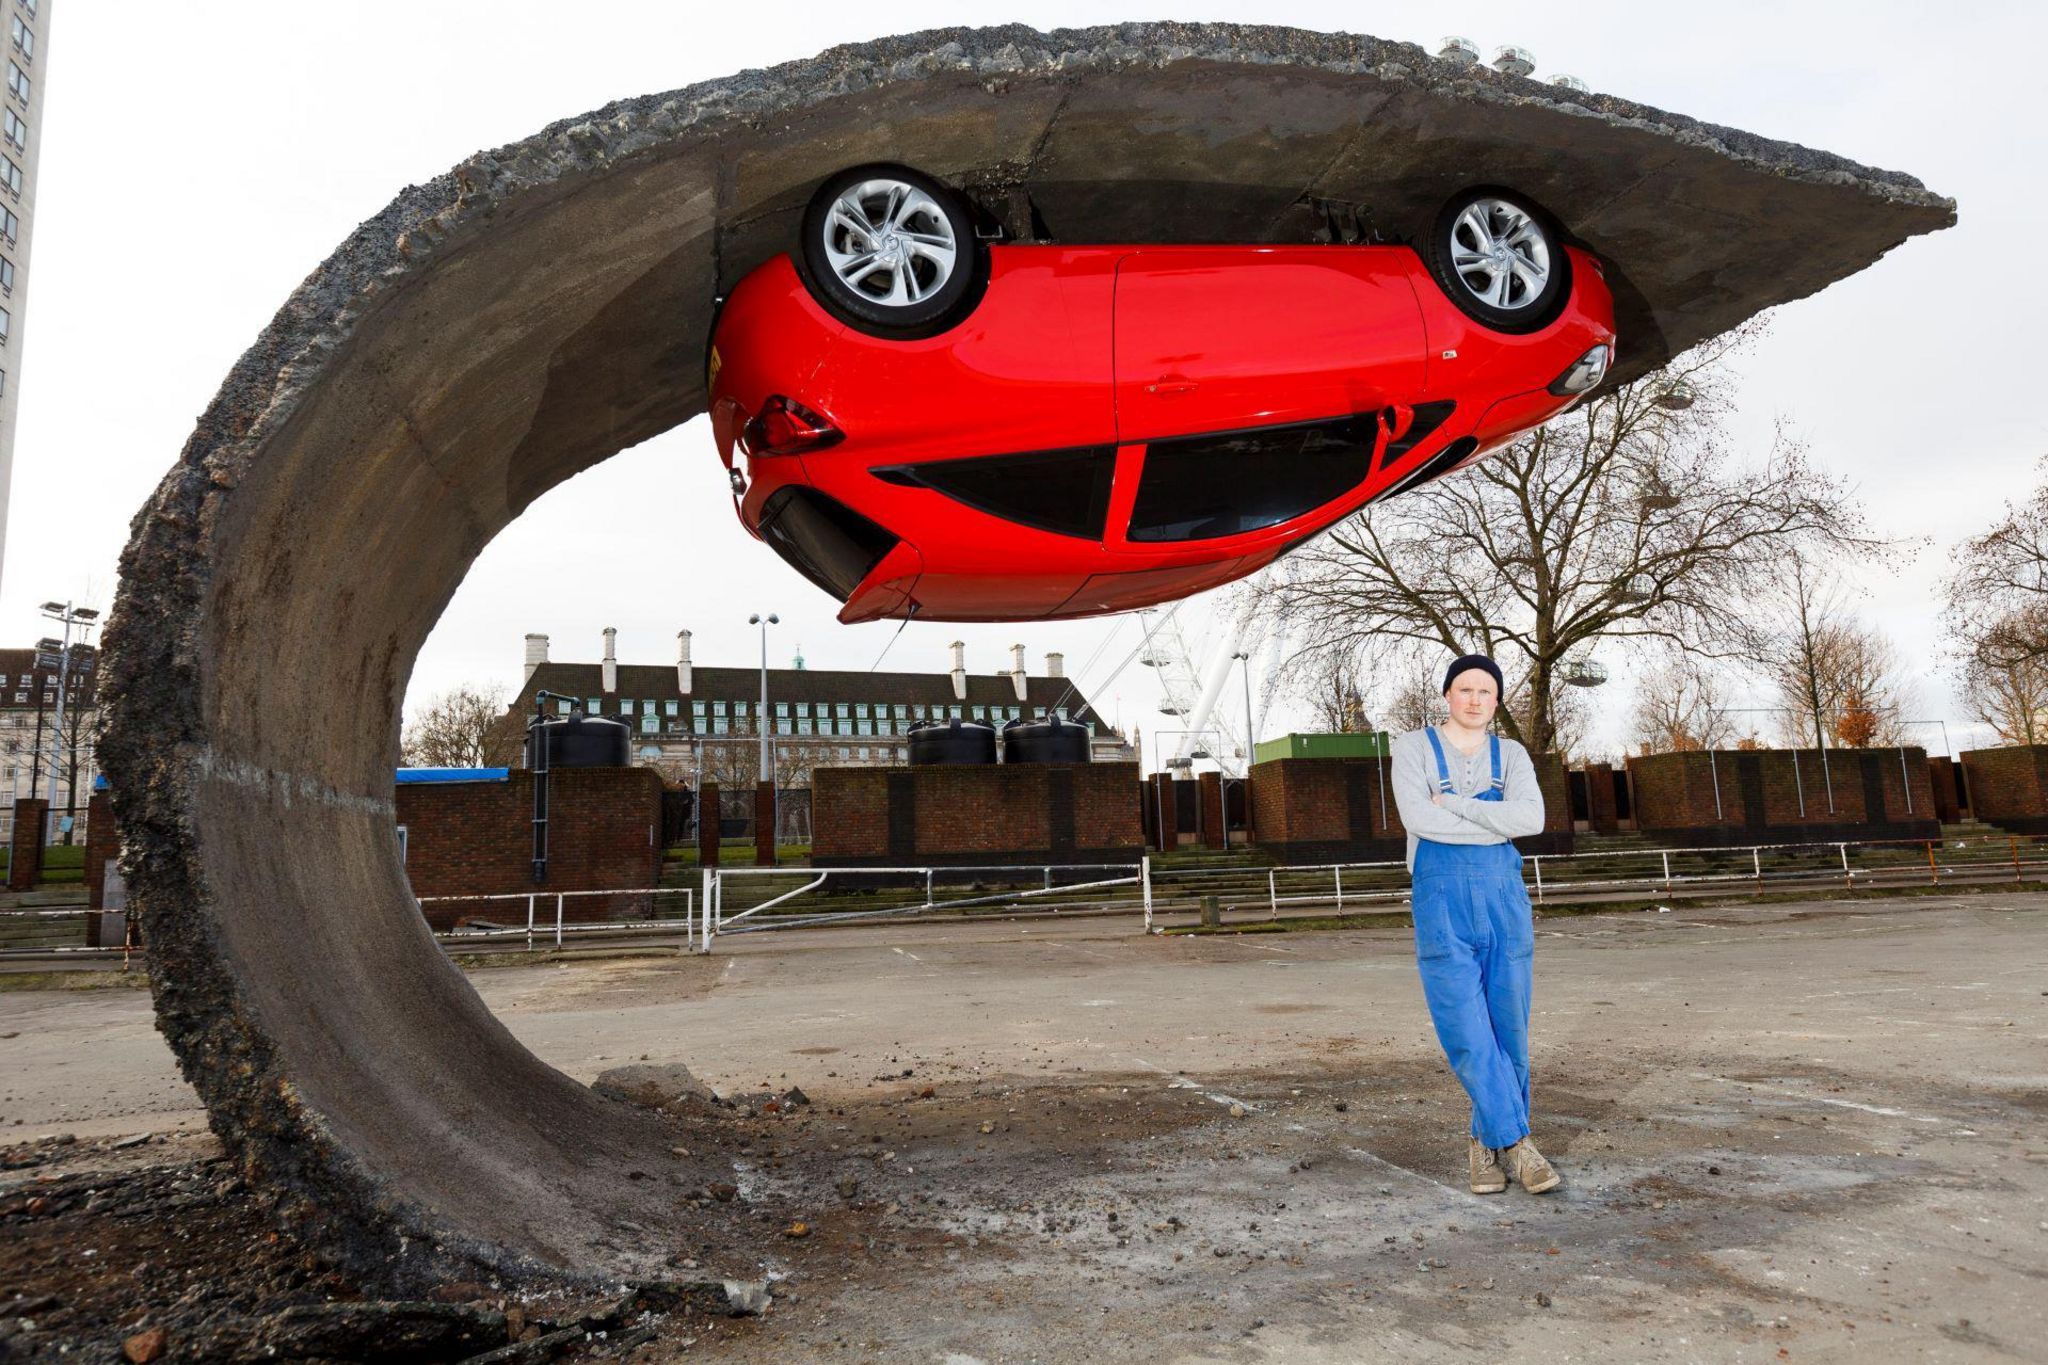 Alex Chinneck pictured in 2015 with his art installation "Pick yourself up and pull yourself together"